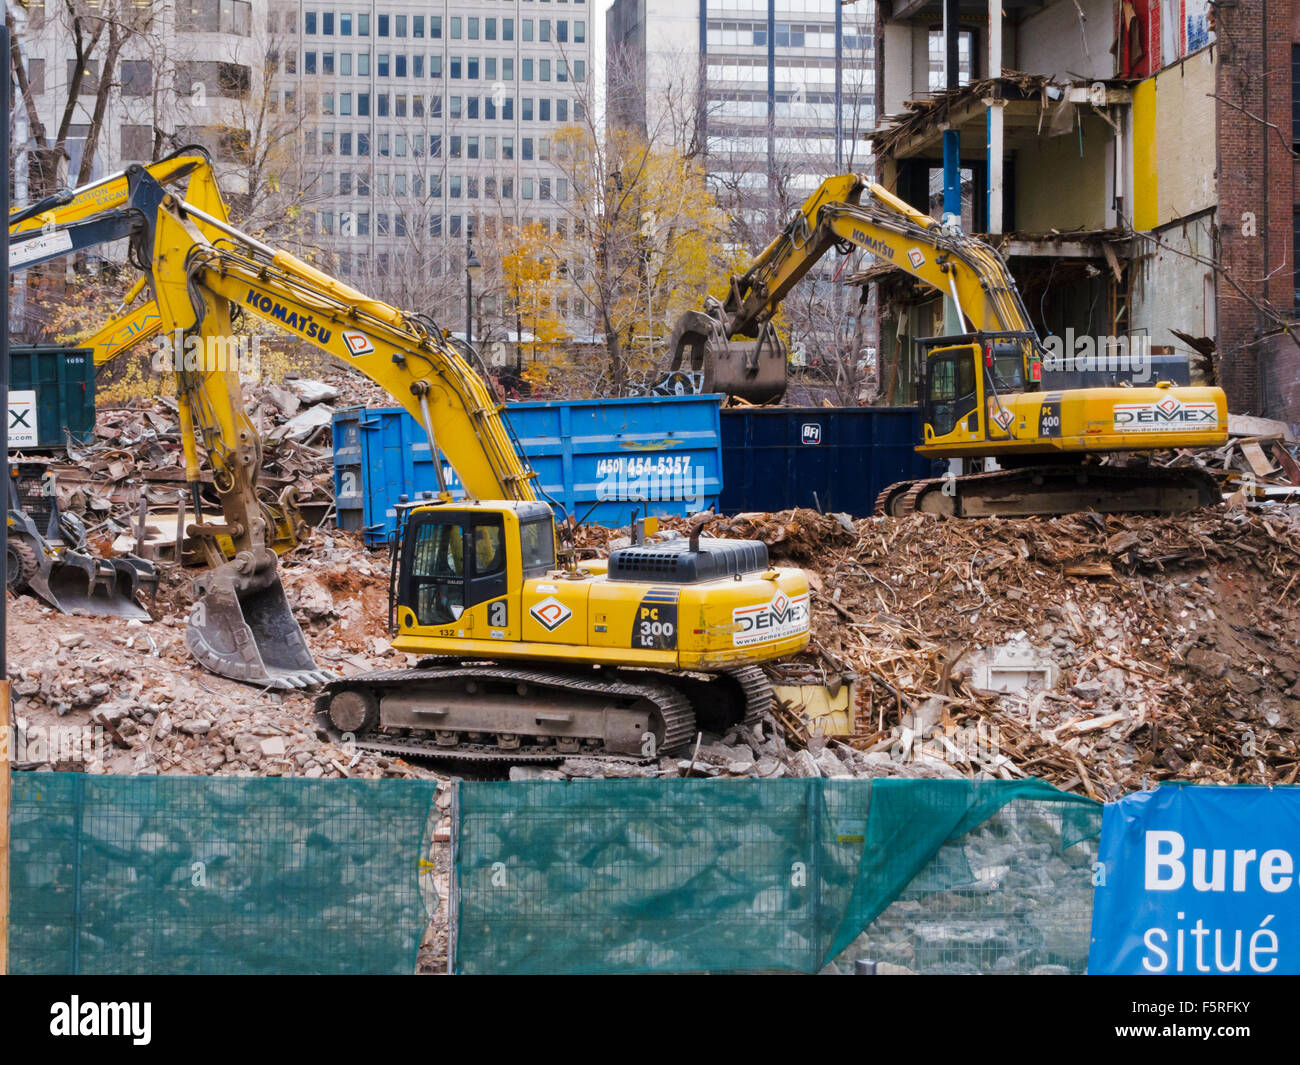 Komatsu PC300LC and PC400LC excavators at a demolition site in Montreal, Quebec, Canada. Stock Photo